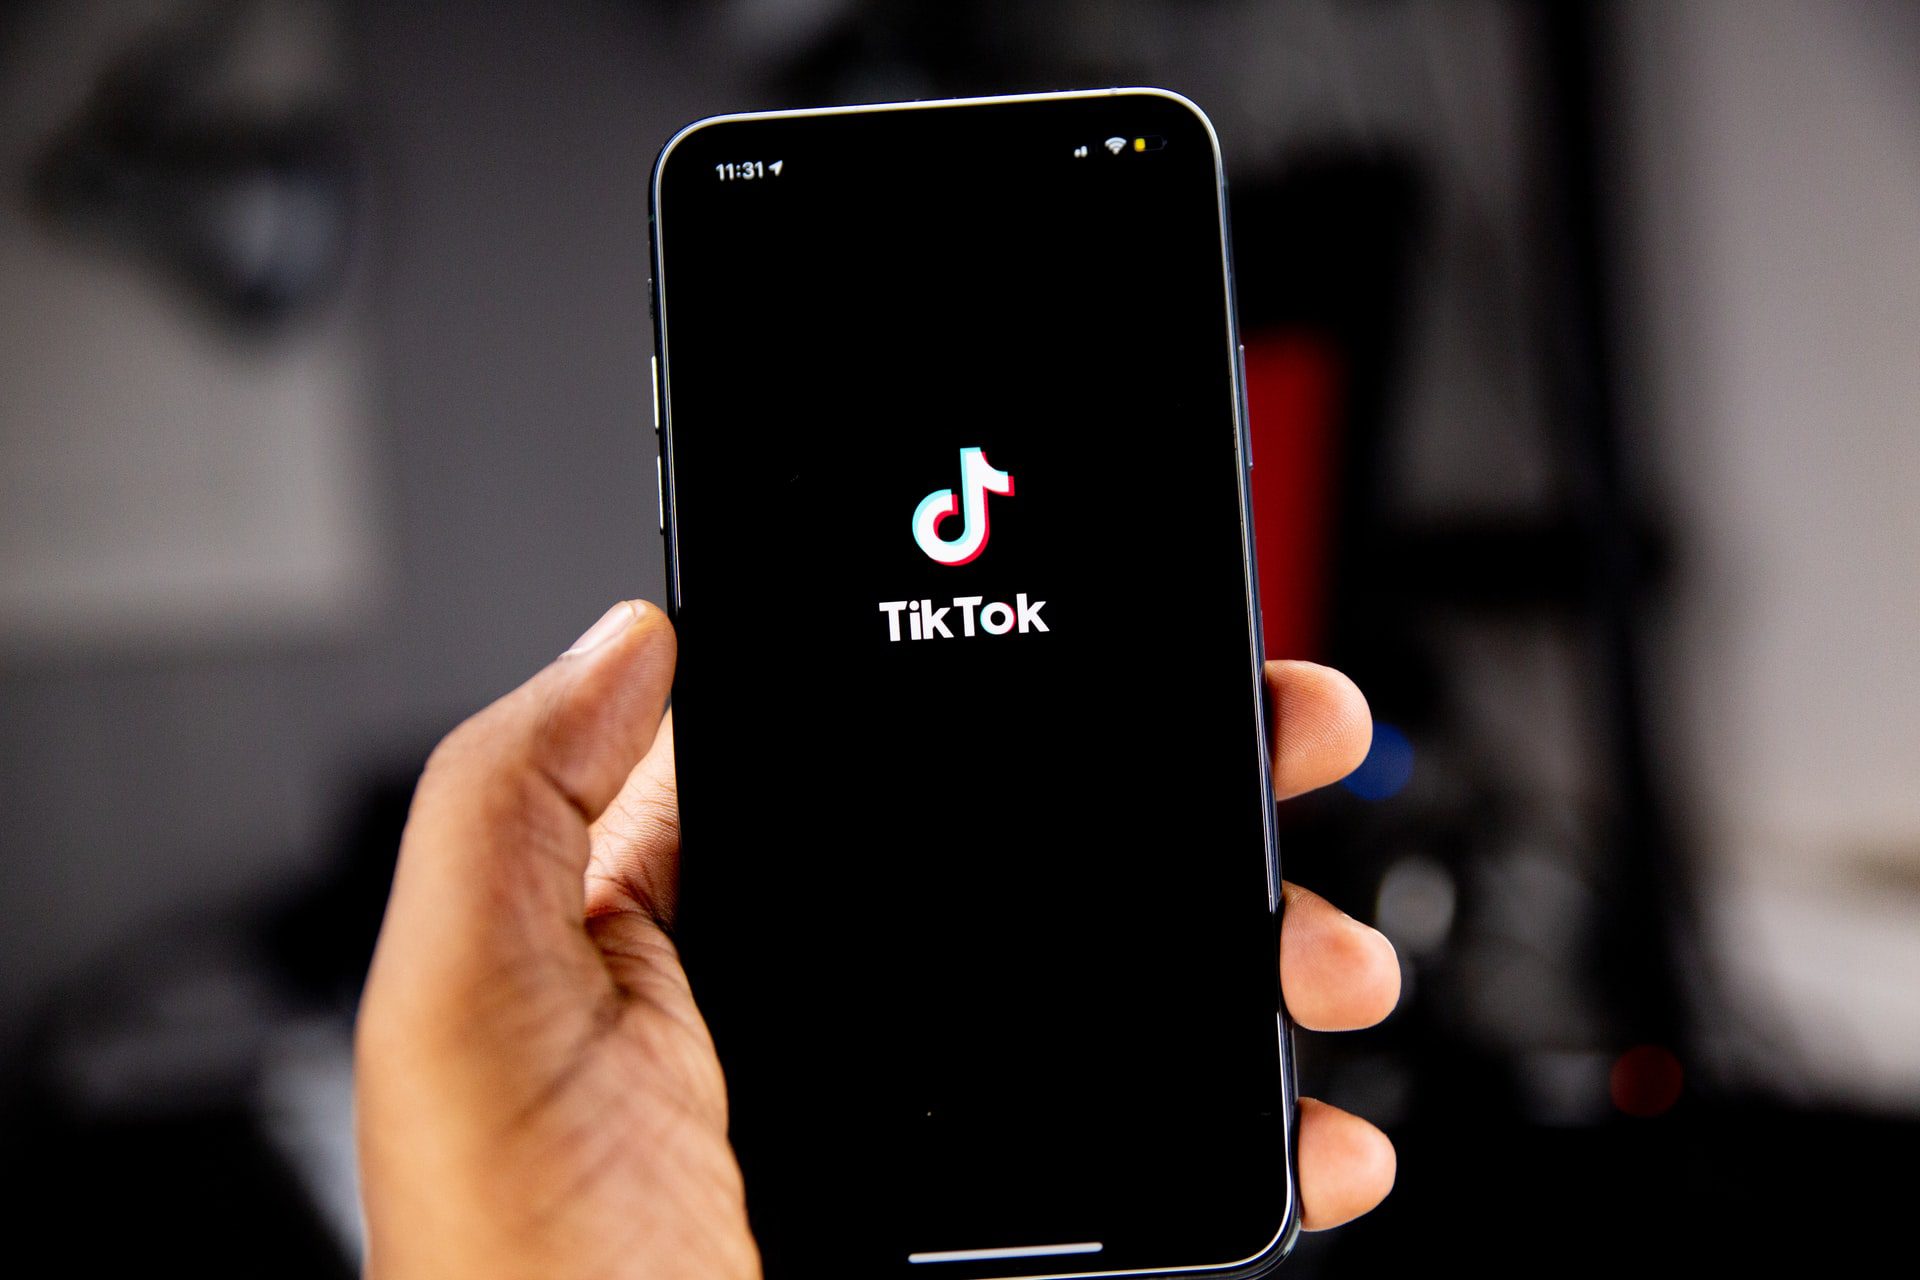 Don't Believe Everything You See On The Internet: Famous TikTok Trends Dermatologists Warn People To Avoid